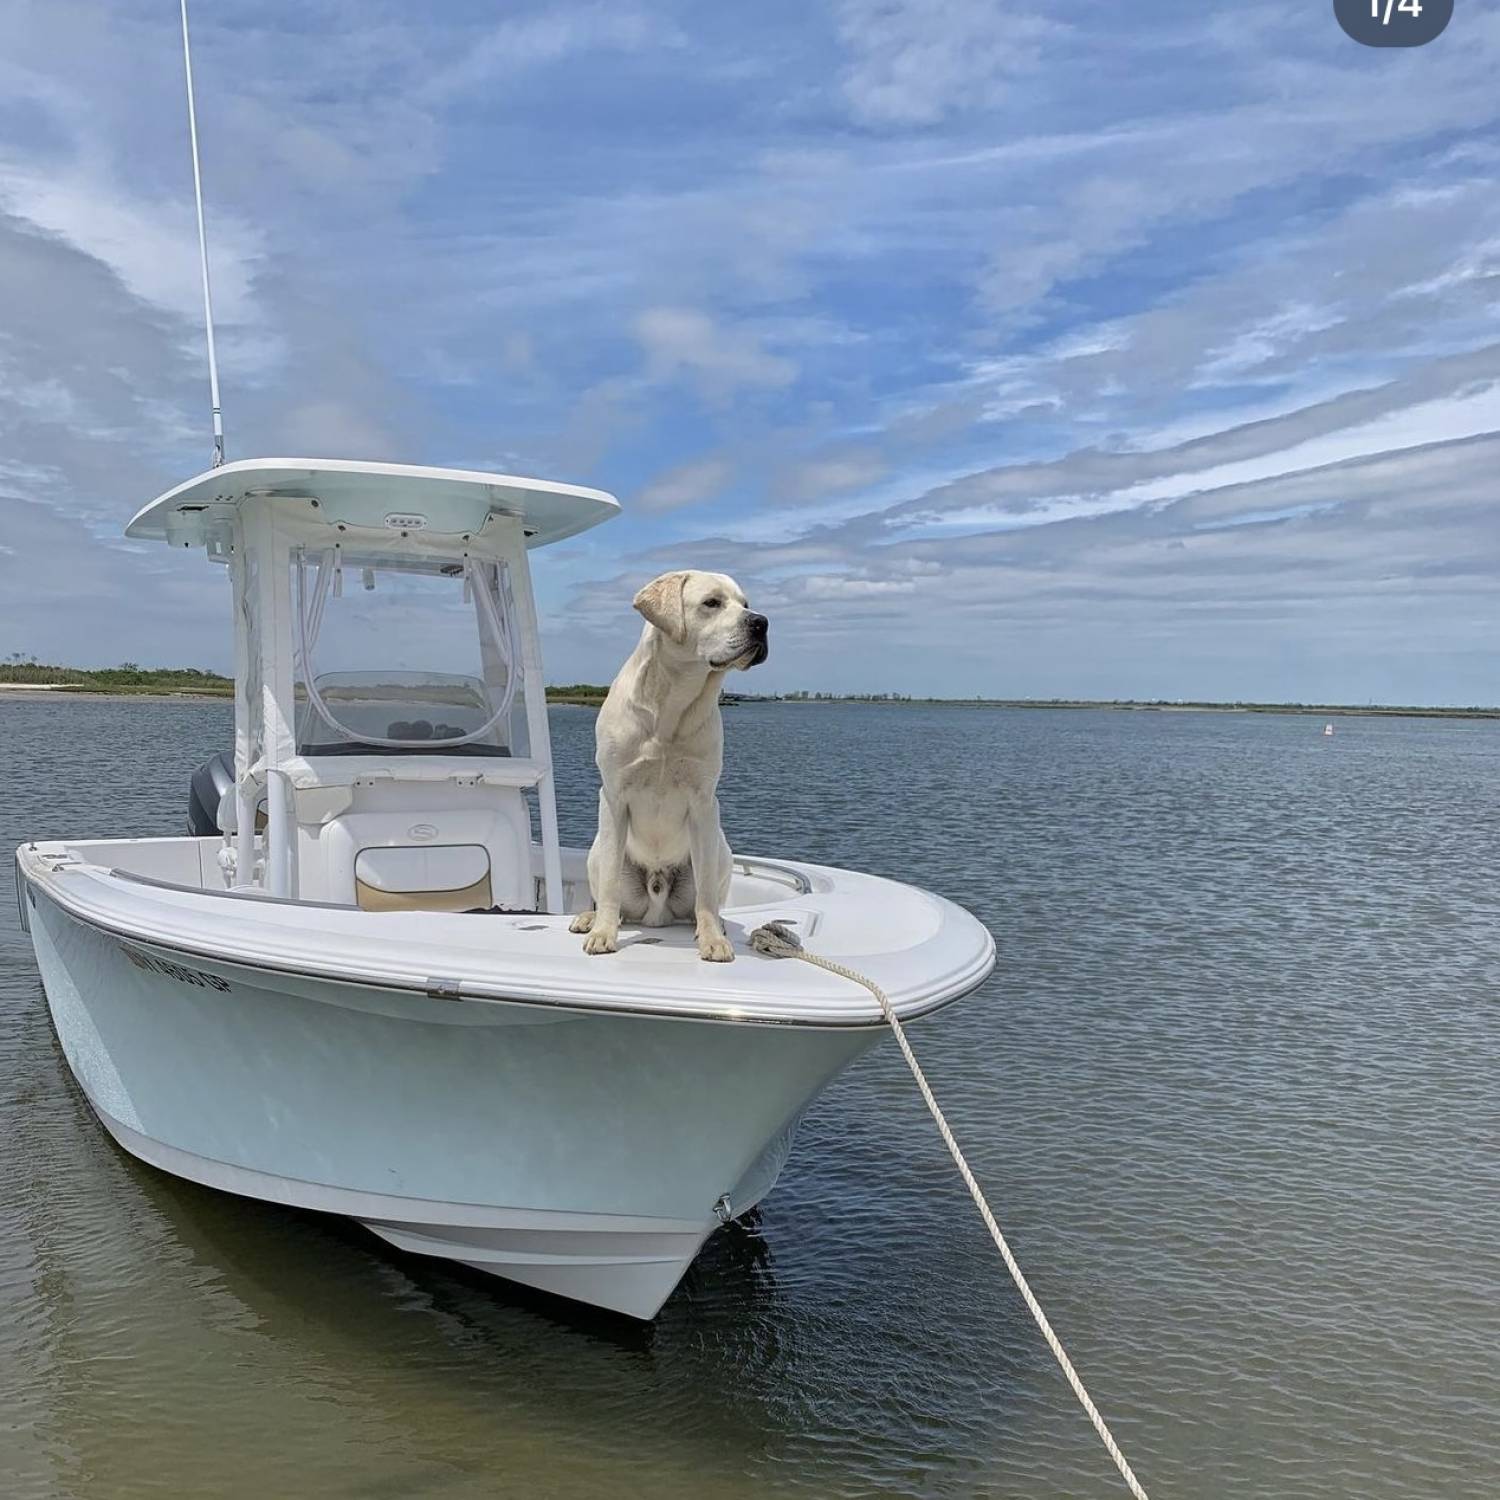 Title: Pups and boats - On board their Sportsman Open 232 Center Console - Location: Jones Beach, Long Island. Participating in the Photo Contest #SportsmanMay2023